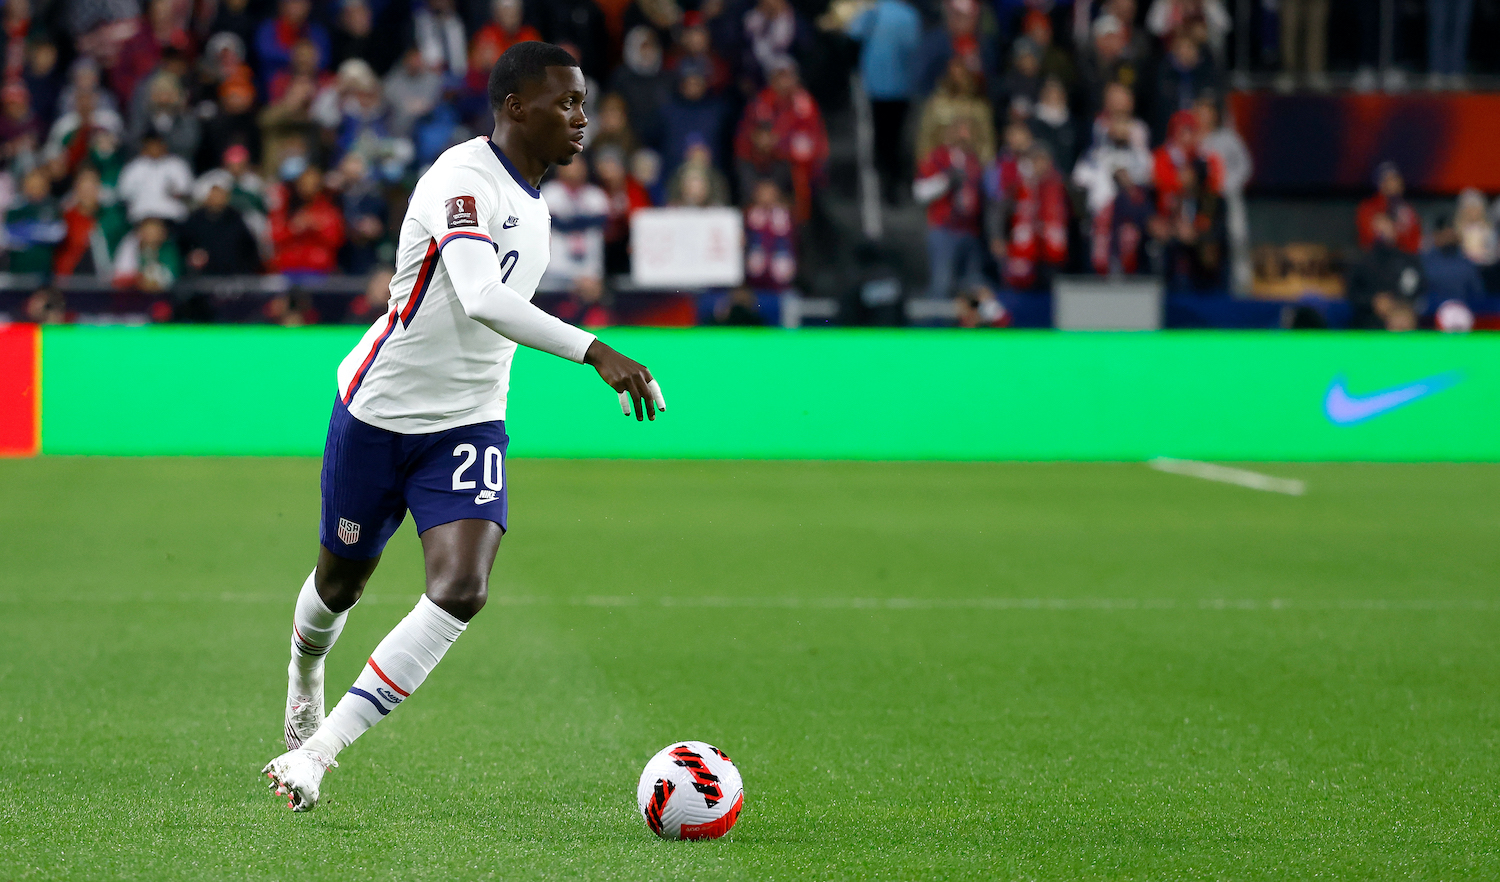 CINCINNATI, OH - NOVEMBER 12: Tim Weah #20 of the United States controls the ball during the FIFA World Cup 2022 Qualifier match against Mexico at TQL Stadium on November 12, 2021 in Cincinnati, Ohio. (Photo by Kirk Irwin/Getty Images)